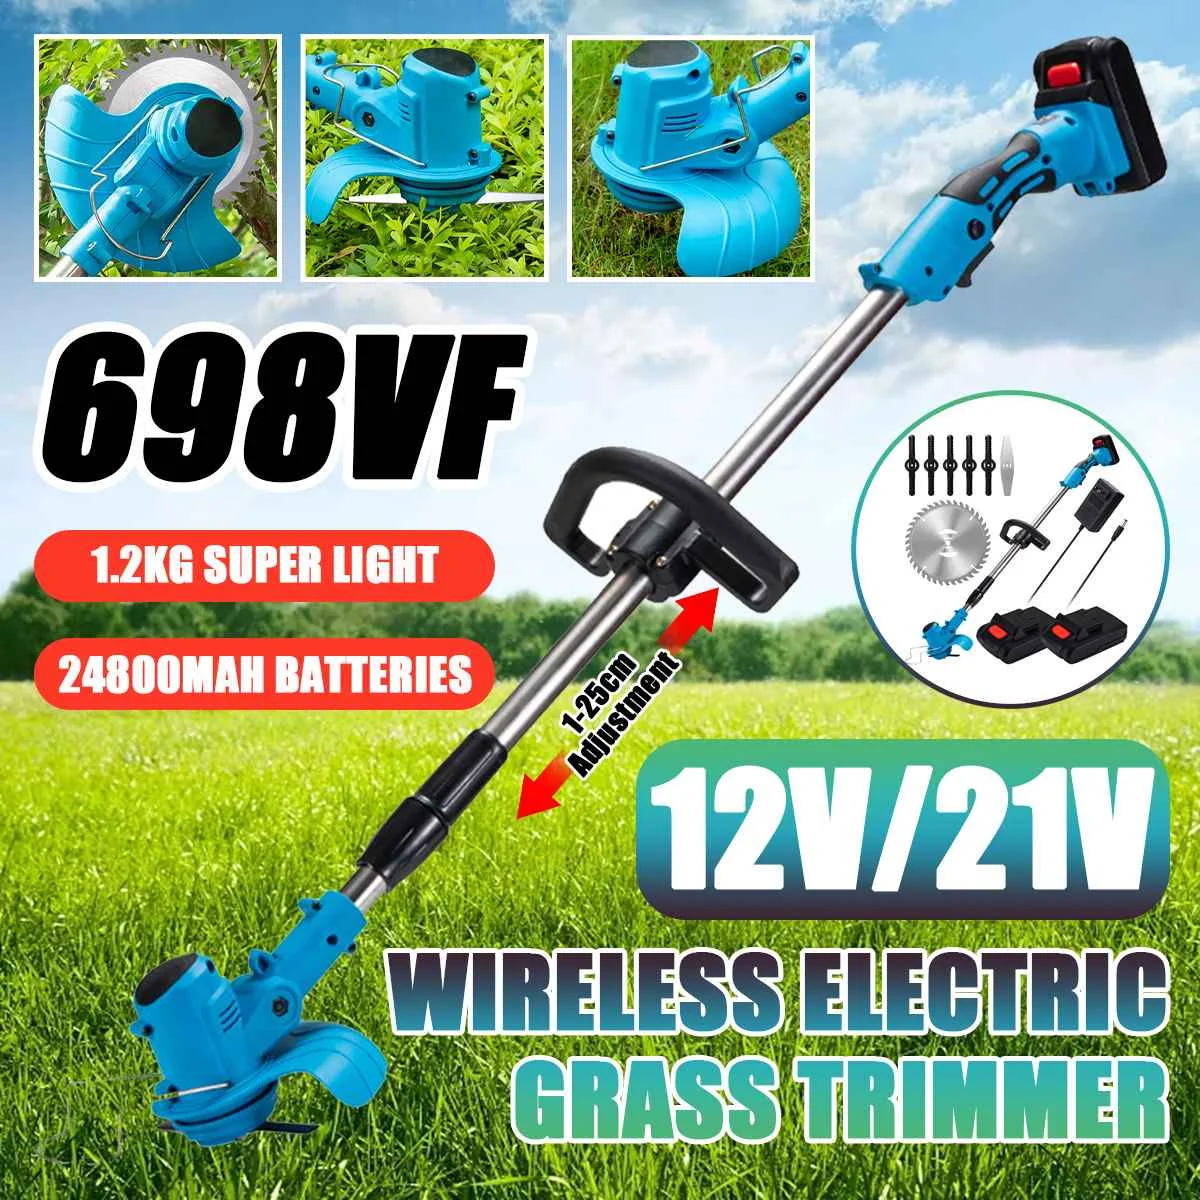 

698VF Electric Lawn Mower 12V/21V Cordless Grass Hedge Trimmer Adjustable Handheld Mowing Machine Garden 2 Battery Power Tool